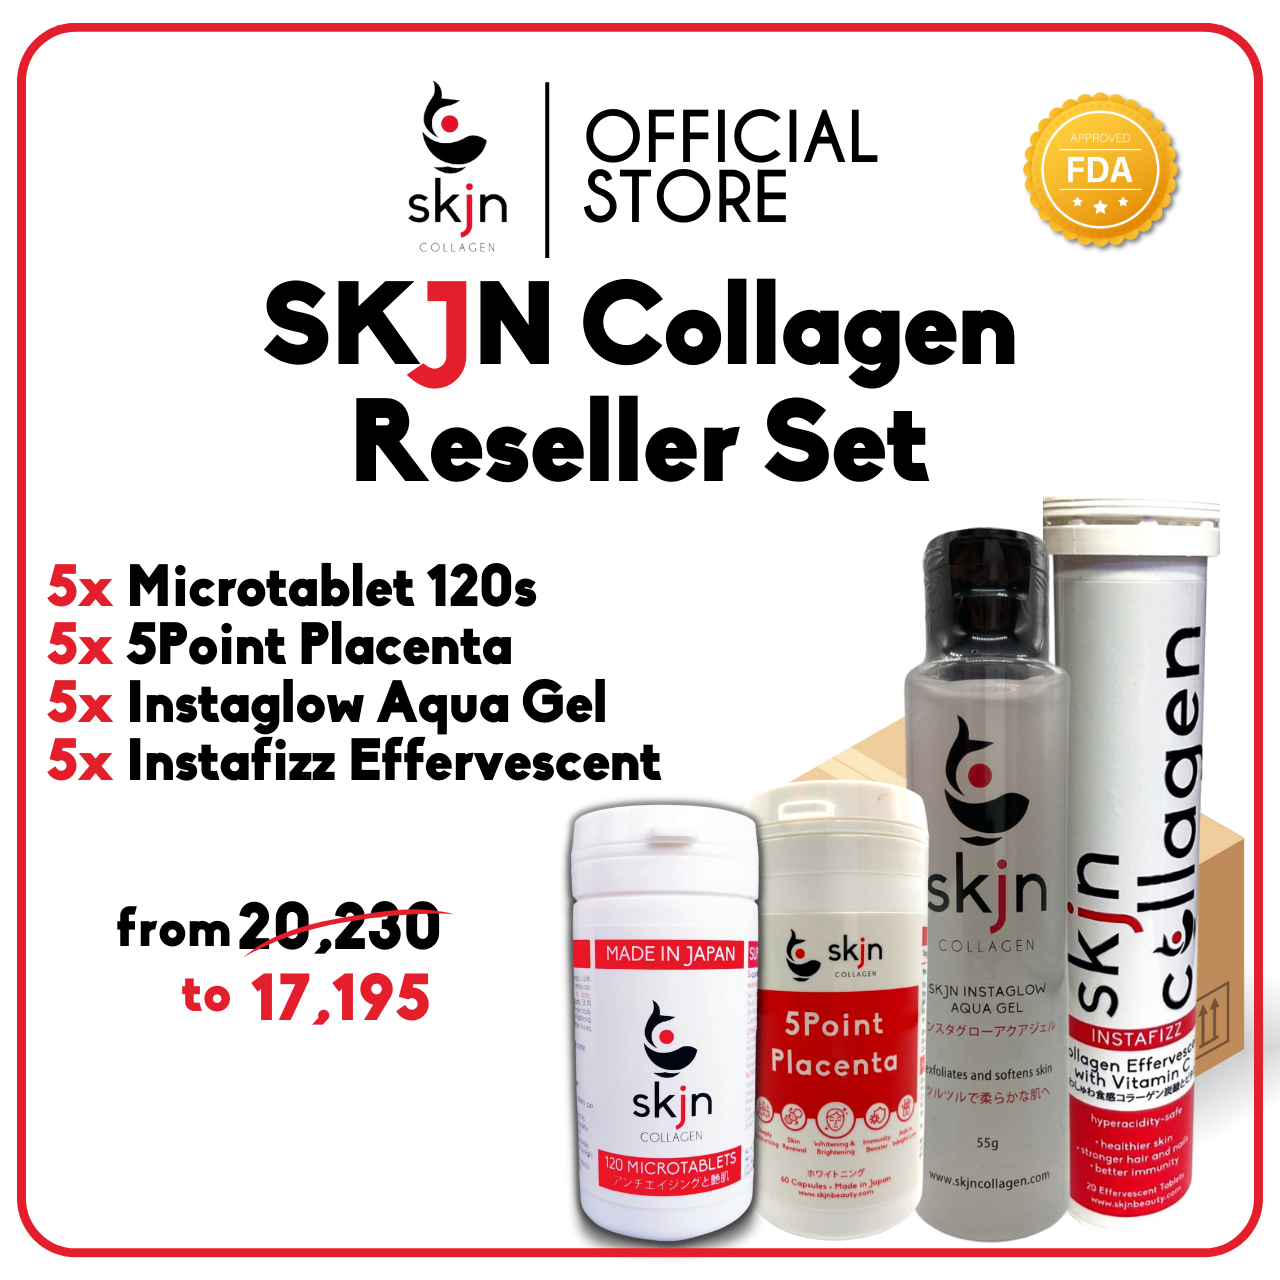 Reseller Set A: Get 15% off on 5 Microtablet 120s, 5 5Point Placenta, 5 AquaGel and 5 Instafizz